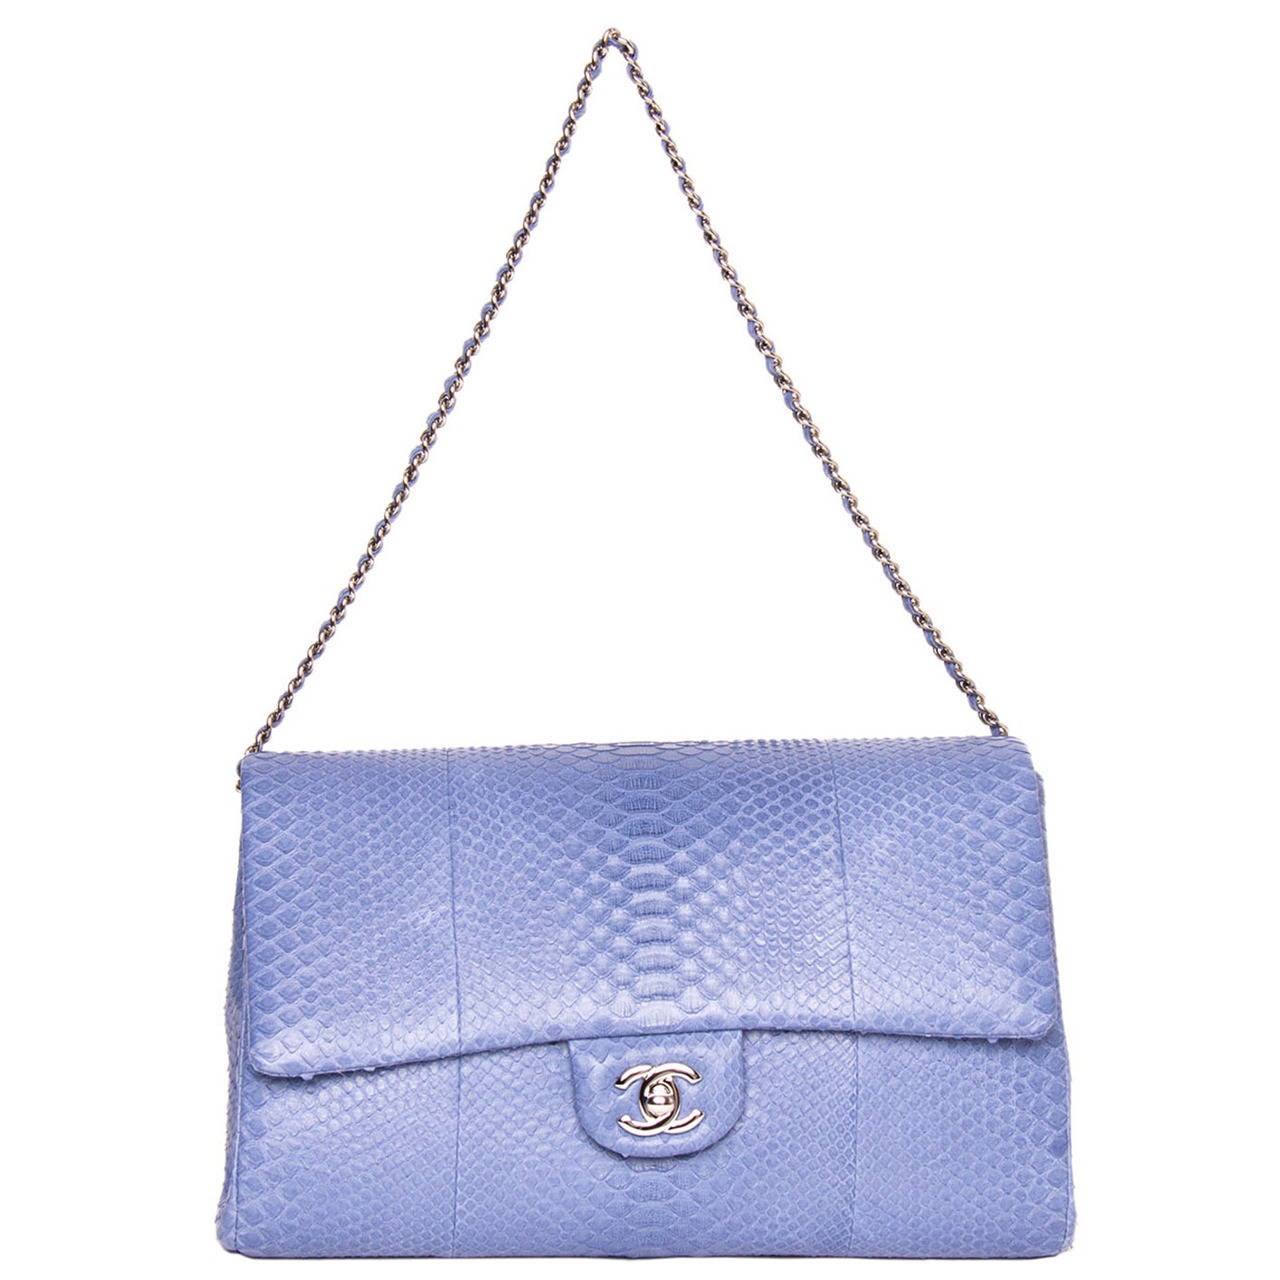 Chanel Periwinkle Python Small Clutch Bag With Strap For Sale